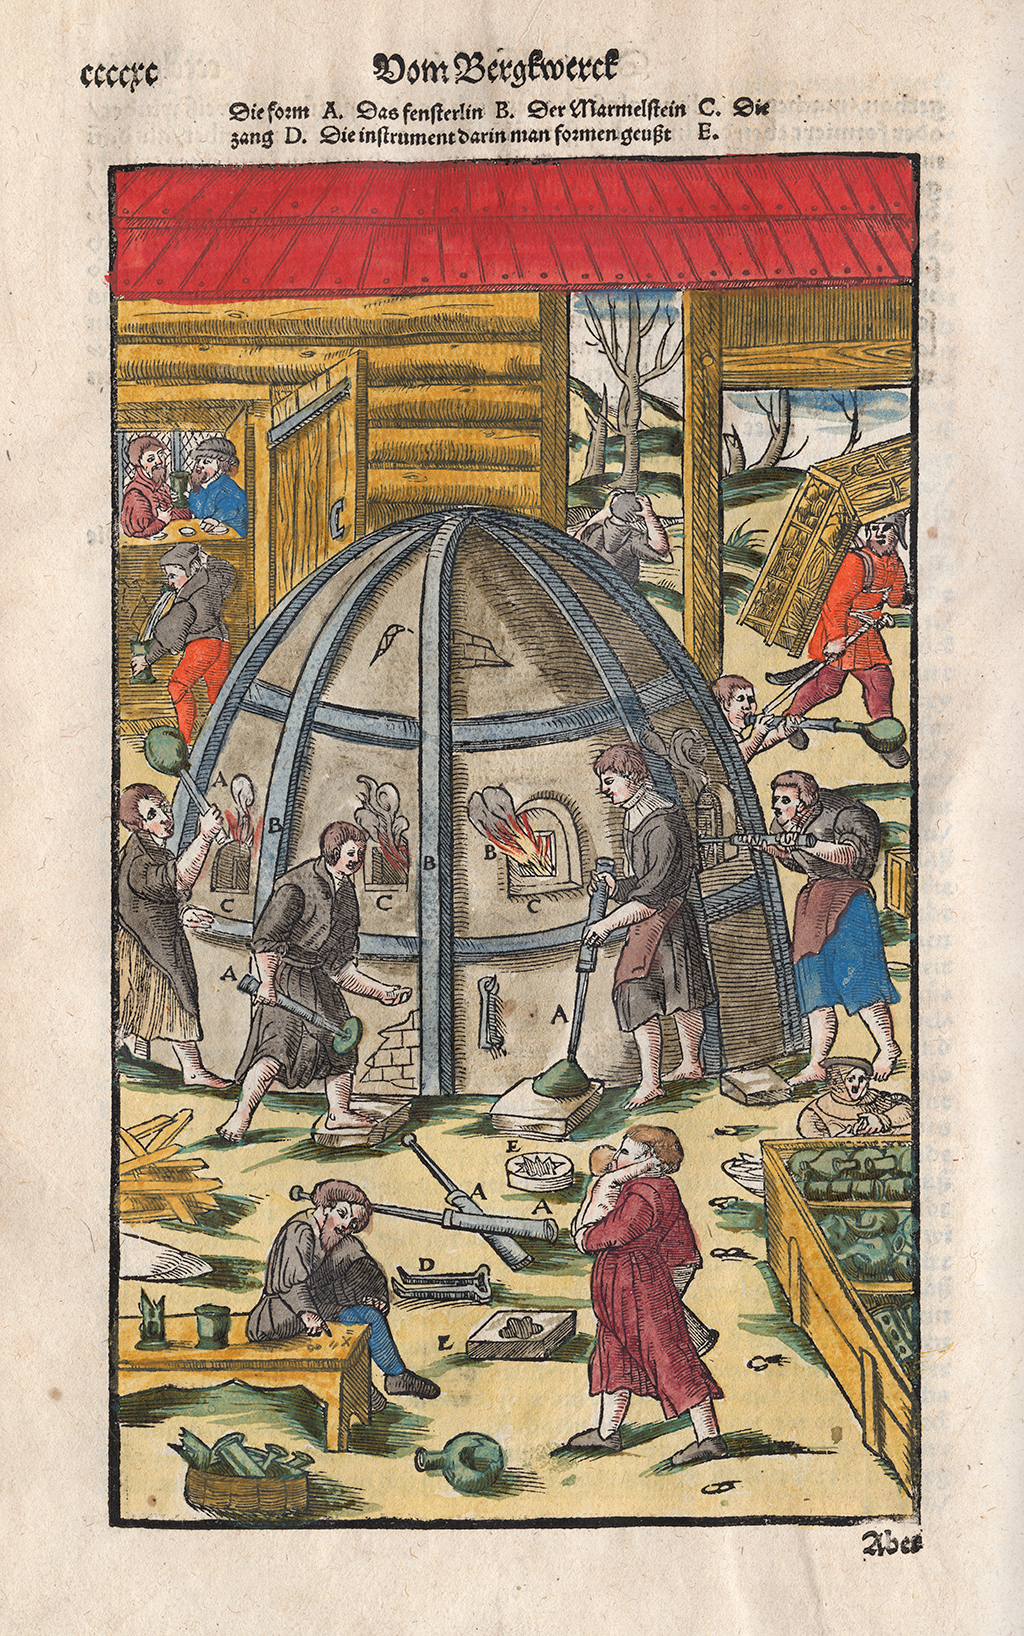 FIG. 39. Glass furnace, with workers. Georg Agricola (German, 1494–1555). In De re metallica [Berckwerck Buch, Frankfurt-am-Main, 1580, p. cccxc]. Rakow Research Library, The Corning Museum of Glass (66820). Photo: The Corning Museum of Glass.